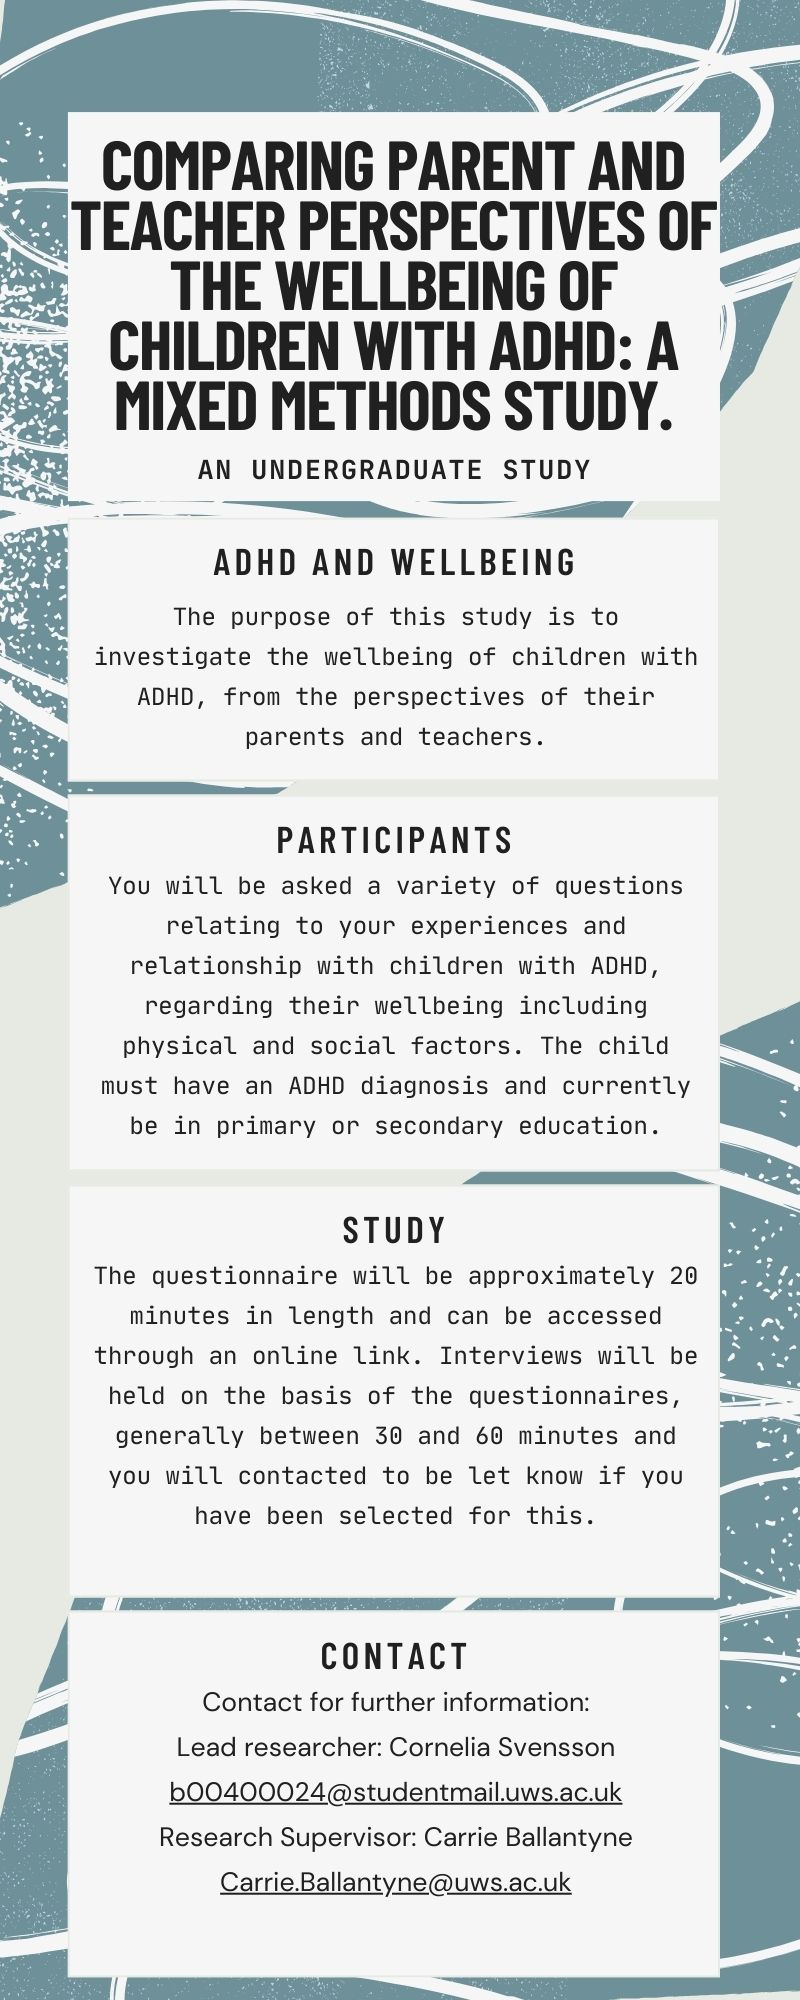 ADHD and Wellbeing Study